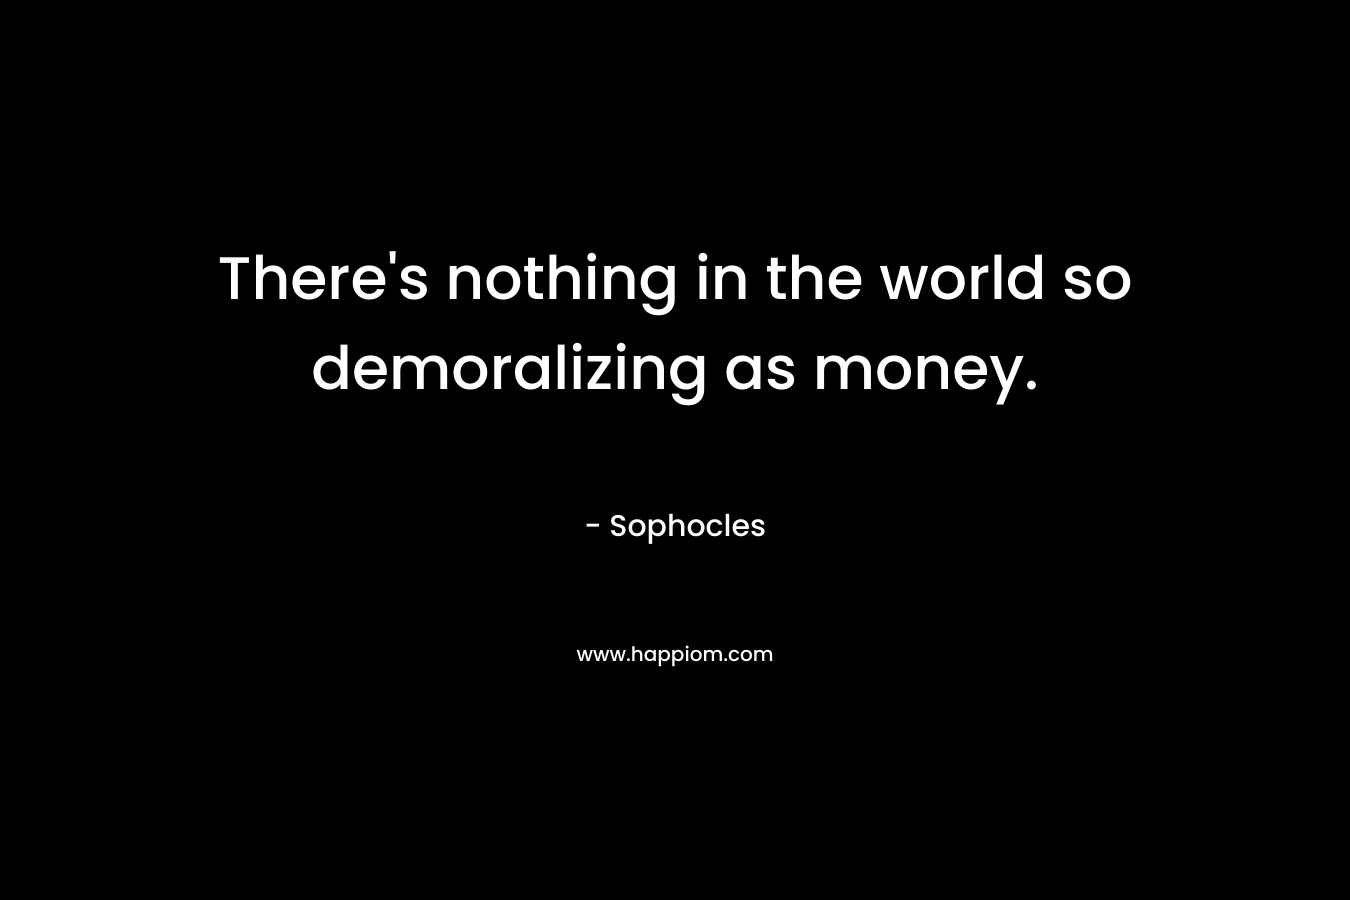 There’s nothing in the world so demoralizing as money. – Sophocles